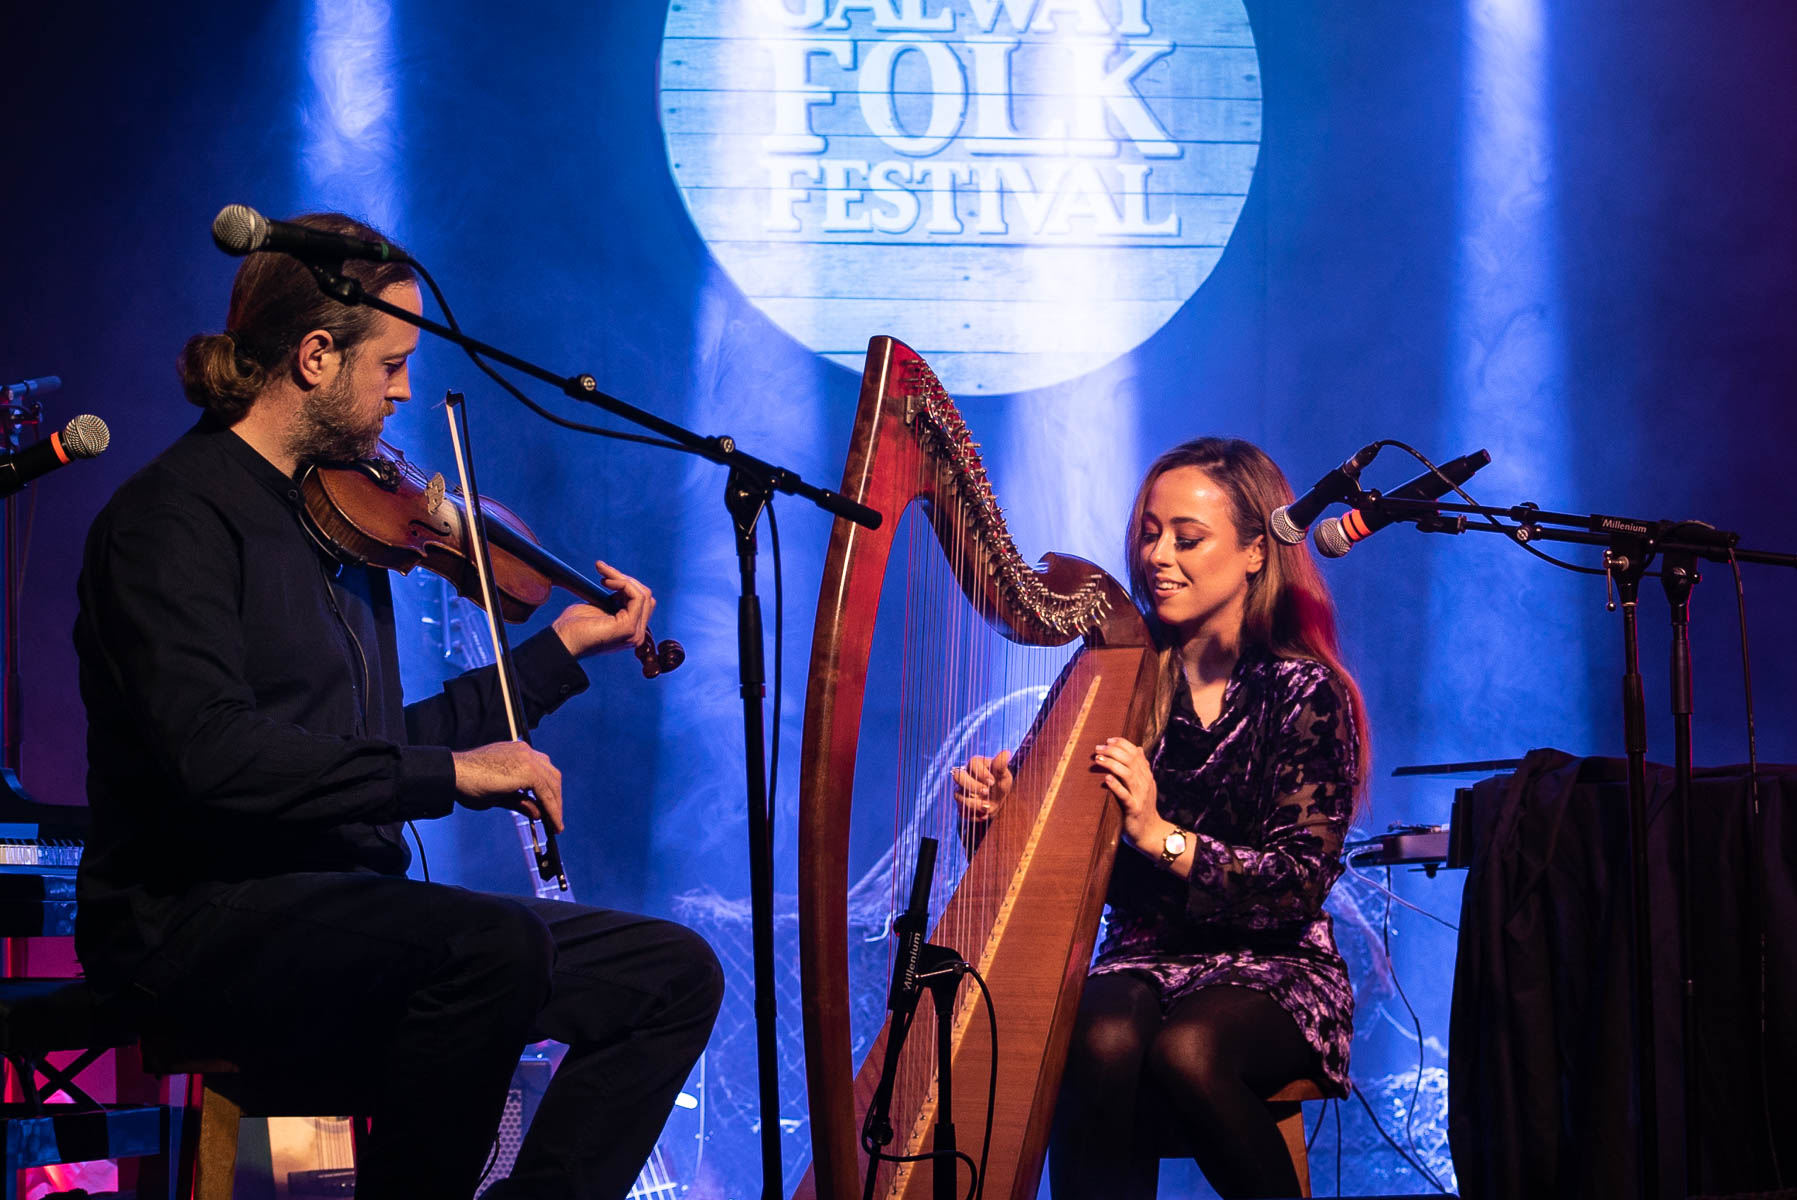 Brídín at Galway Folk Festival. A man playing the fiddle beside a woman playing the harp with mics on stands, with a lit up blue background with the festival logo in light blue.